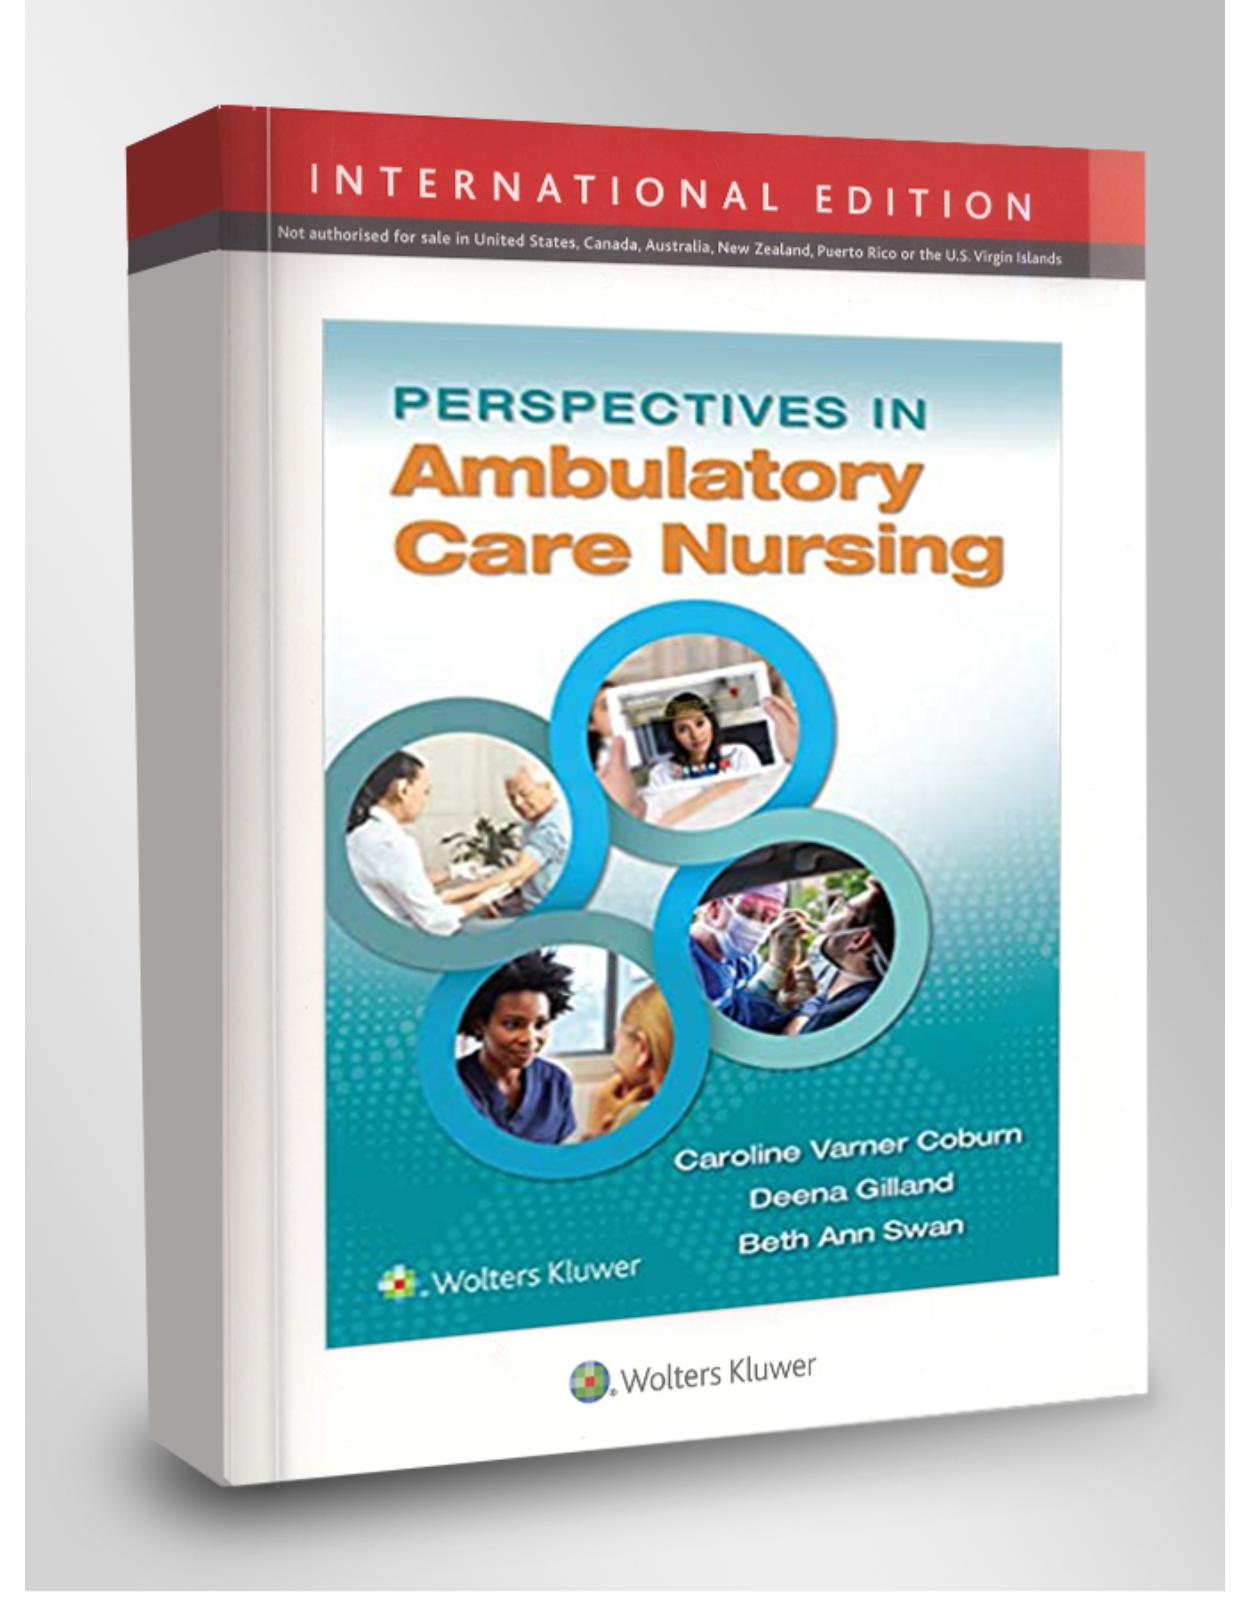 Perspectives in Ambulatory Care Nursing